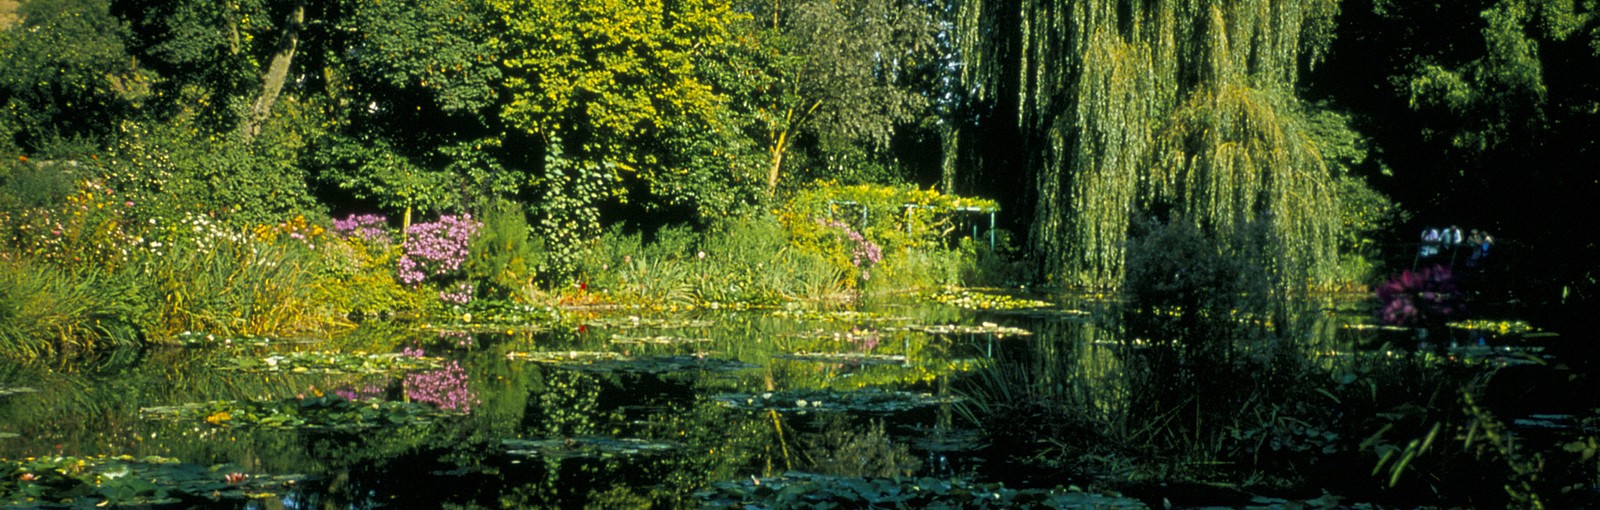 Tours Giverny and Versailles - Full days - Day tours from Paris